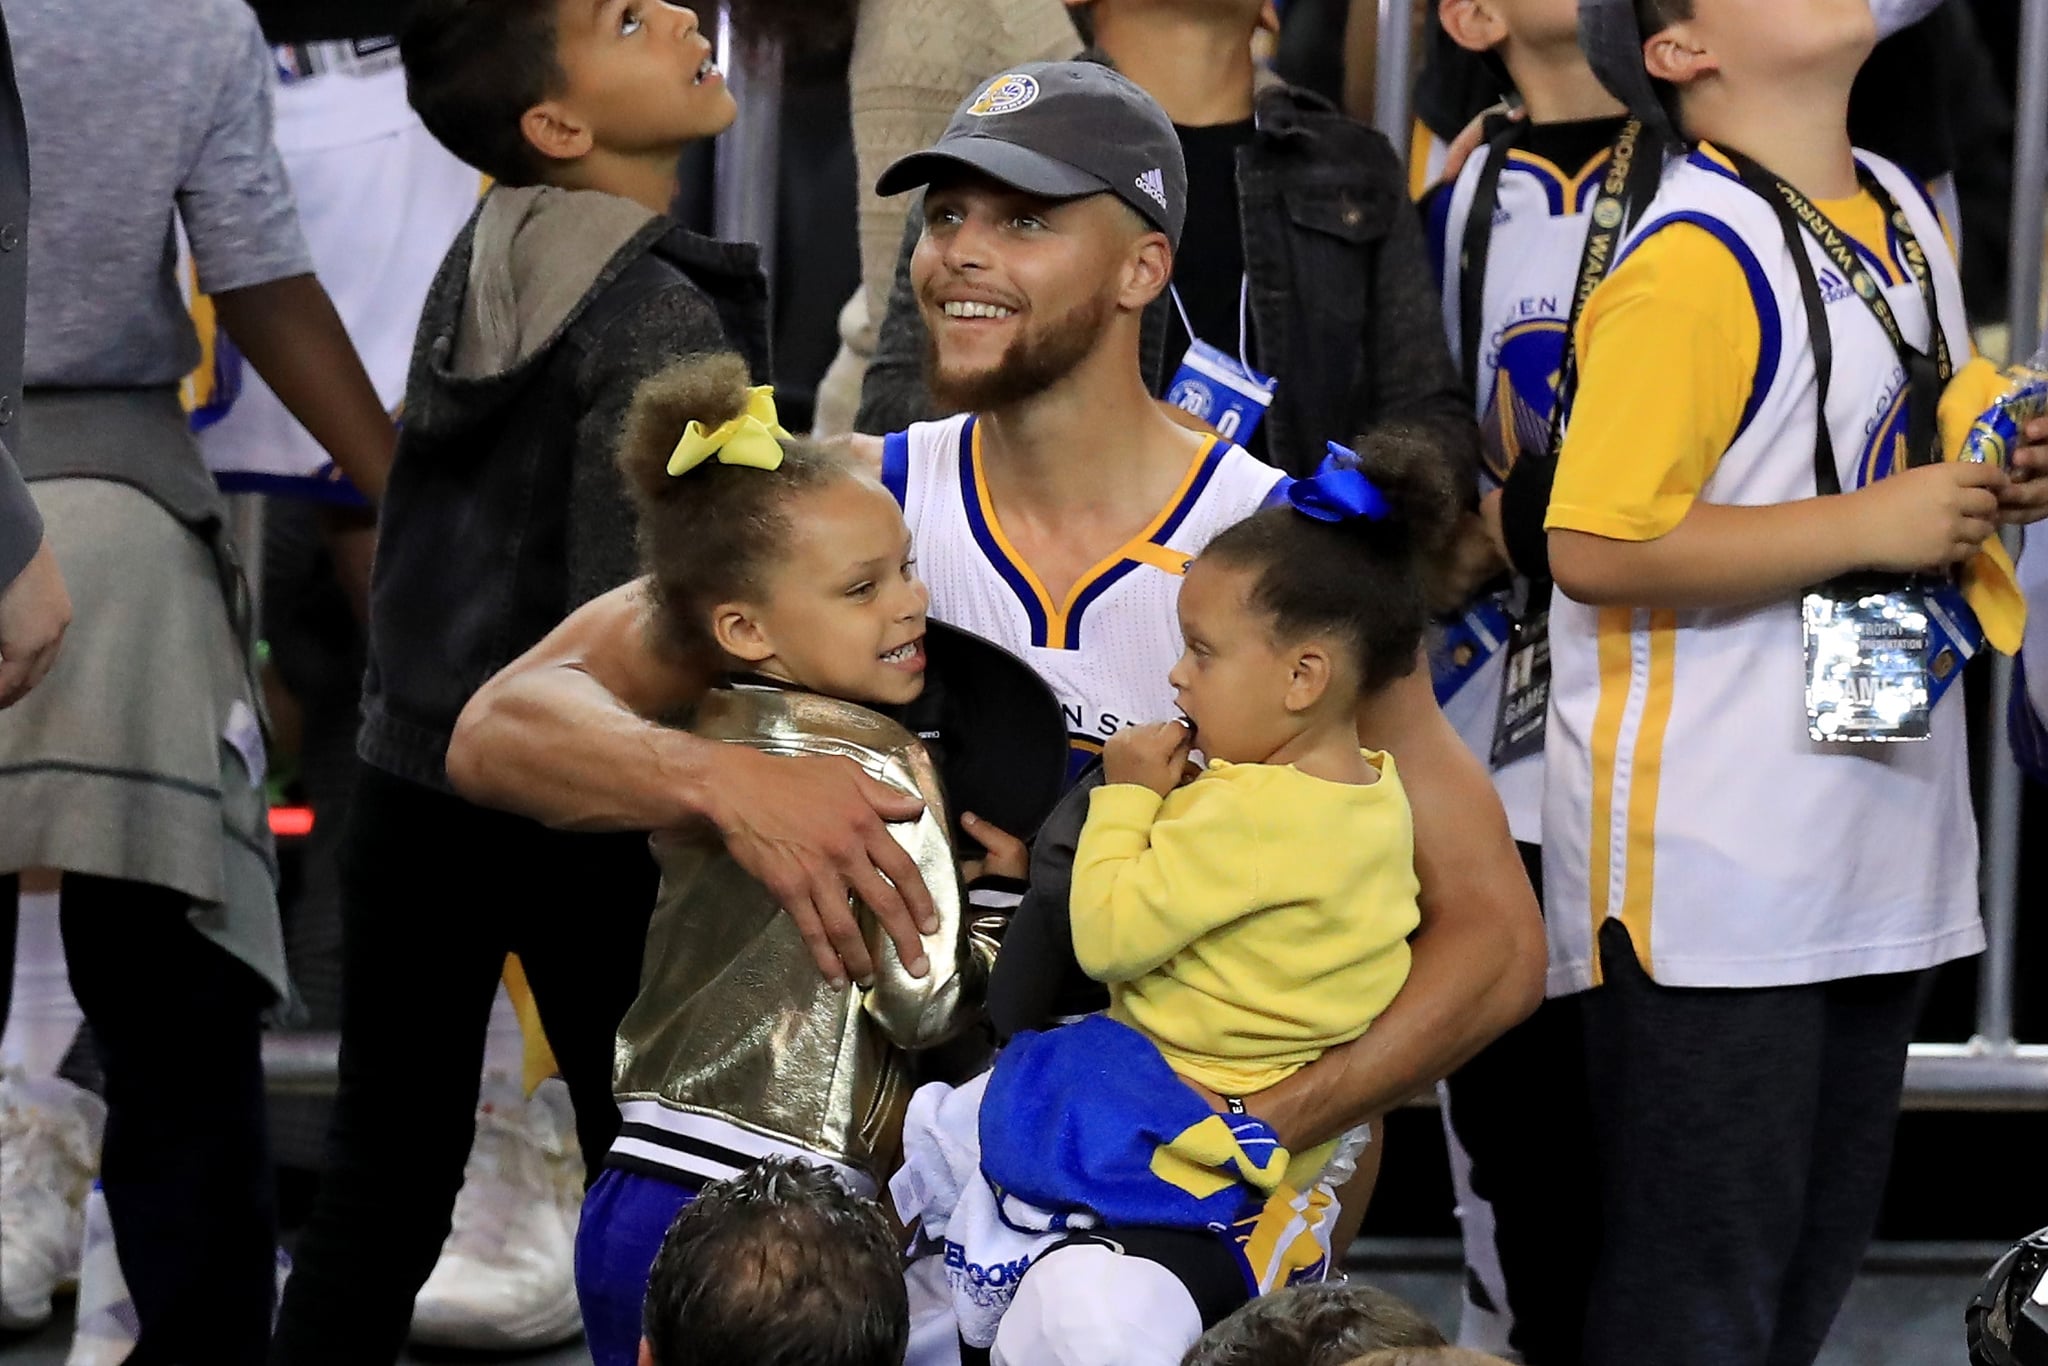 OAKLAND, CA - JUNE 12:  Stephen Curry #30 of the Golden State Warriors celebrates holding his daughters Riley and Ryan after defeating the Cleveland Cavaliers 129-120 in Game 5 to win the 2017 NBA Finals at ORACLE Arena on June 12, 2017 in Oakland, California. NOTE TO USER: User expressly acknowledges and agrees that, by downloading and or using this photograph, User is consenting to the terms and conditions of the Getty Images License Agreement.  (Photo by Ronald Martinez/Getty Images)